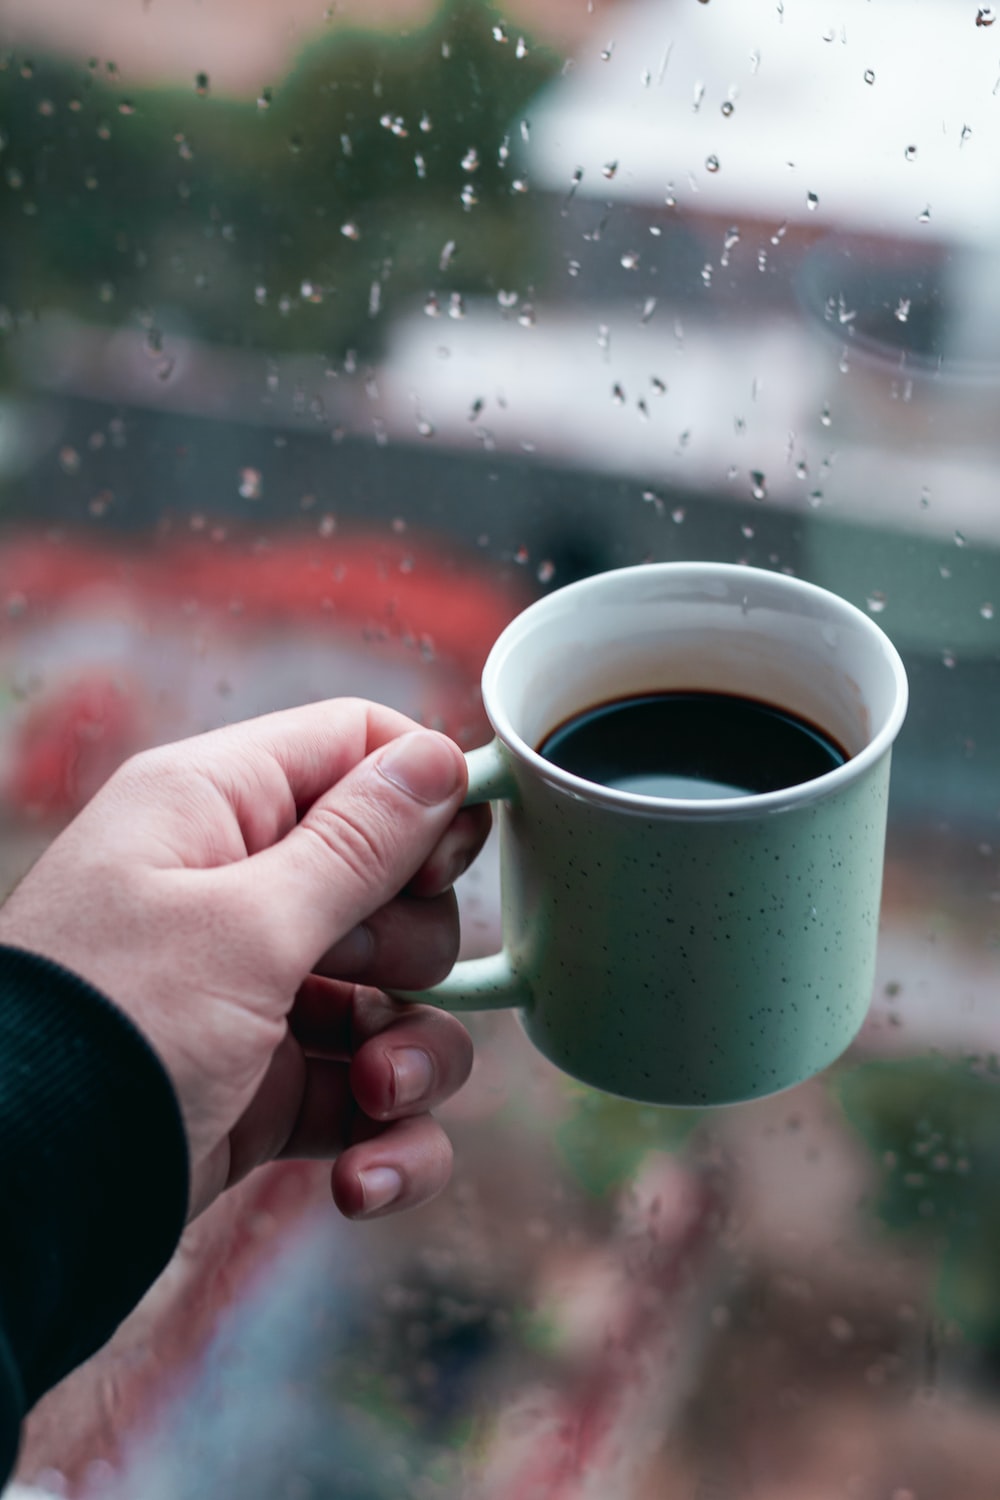 Rain Coffee Picture. Download Free Image